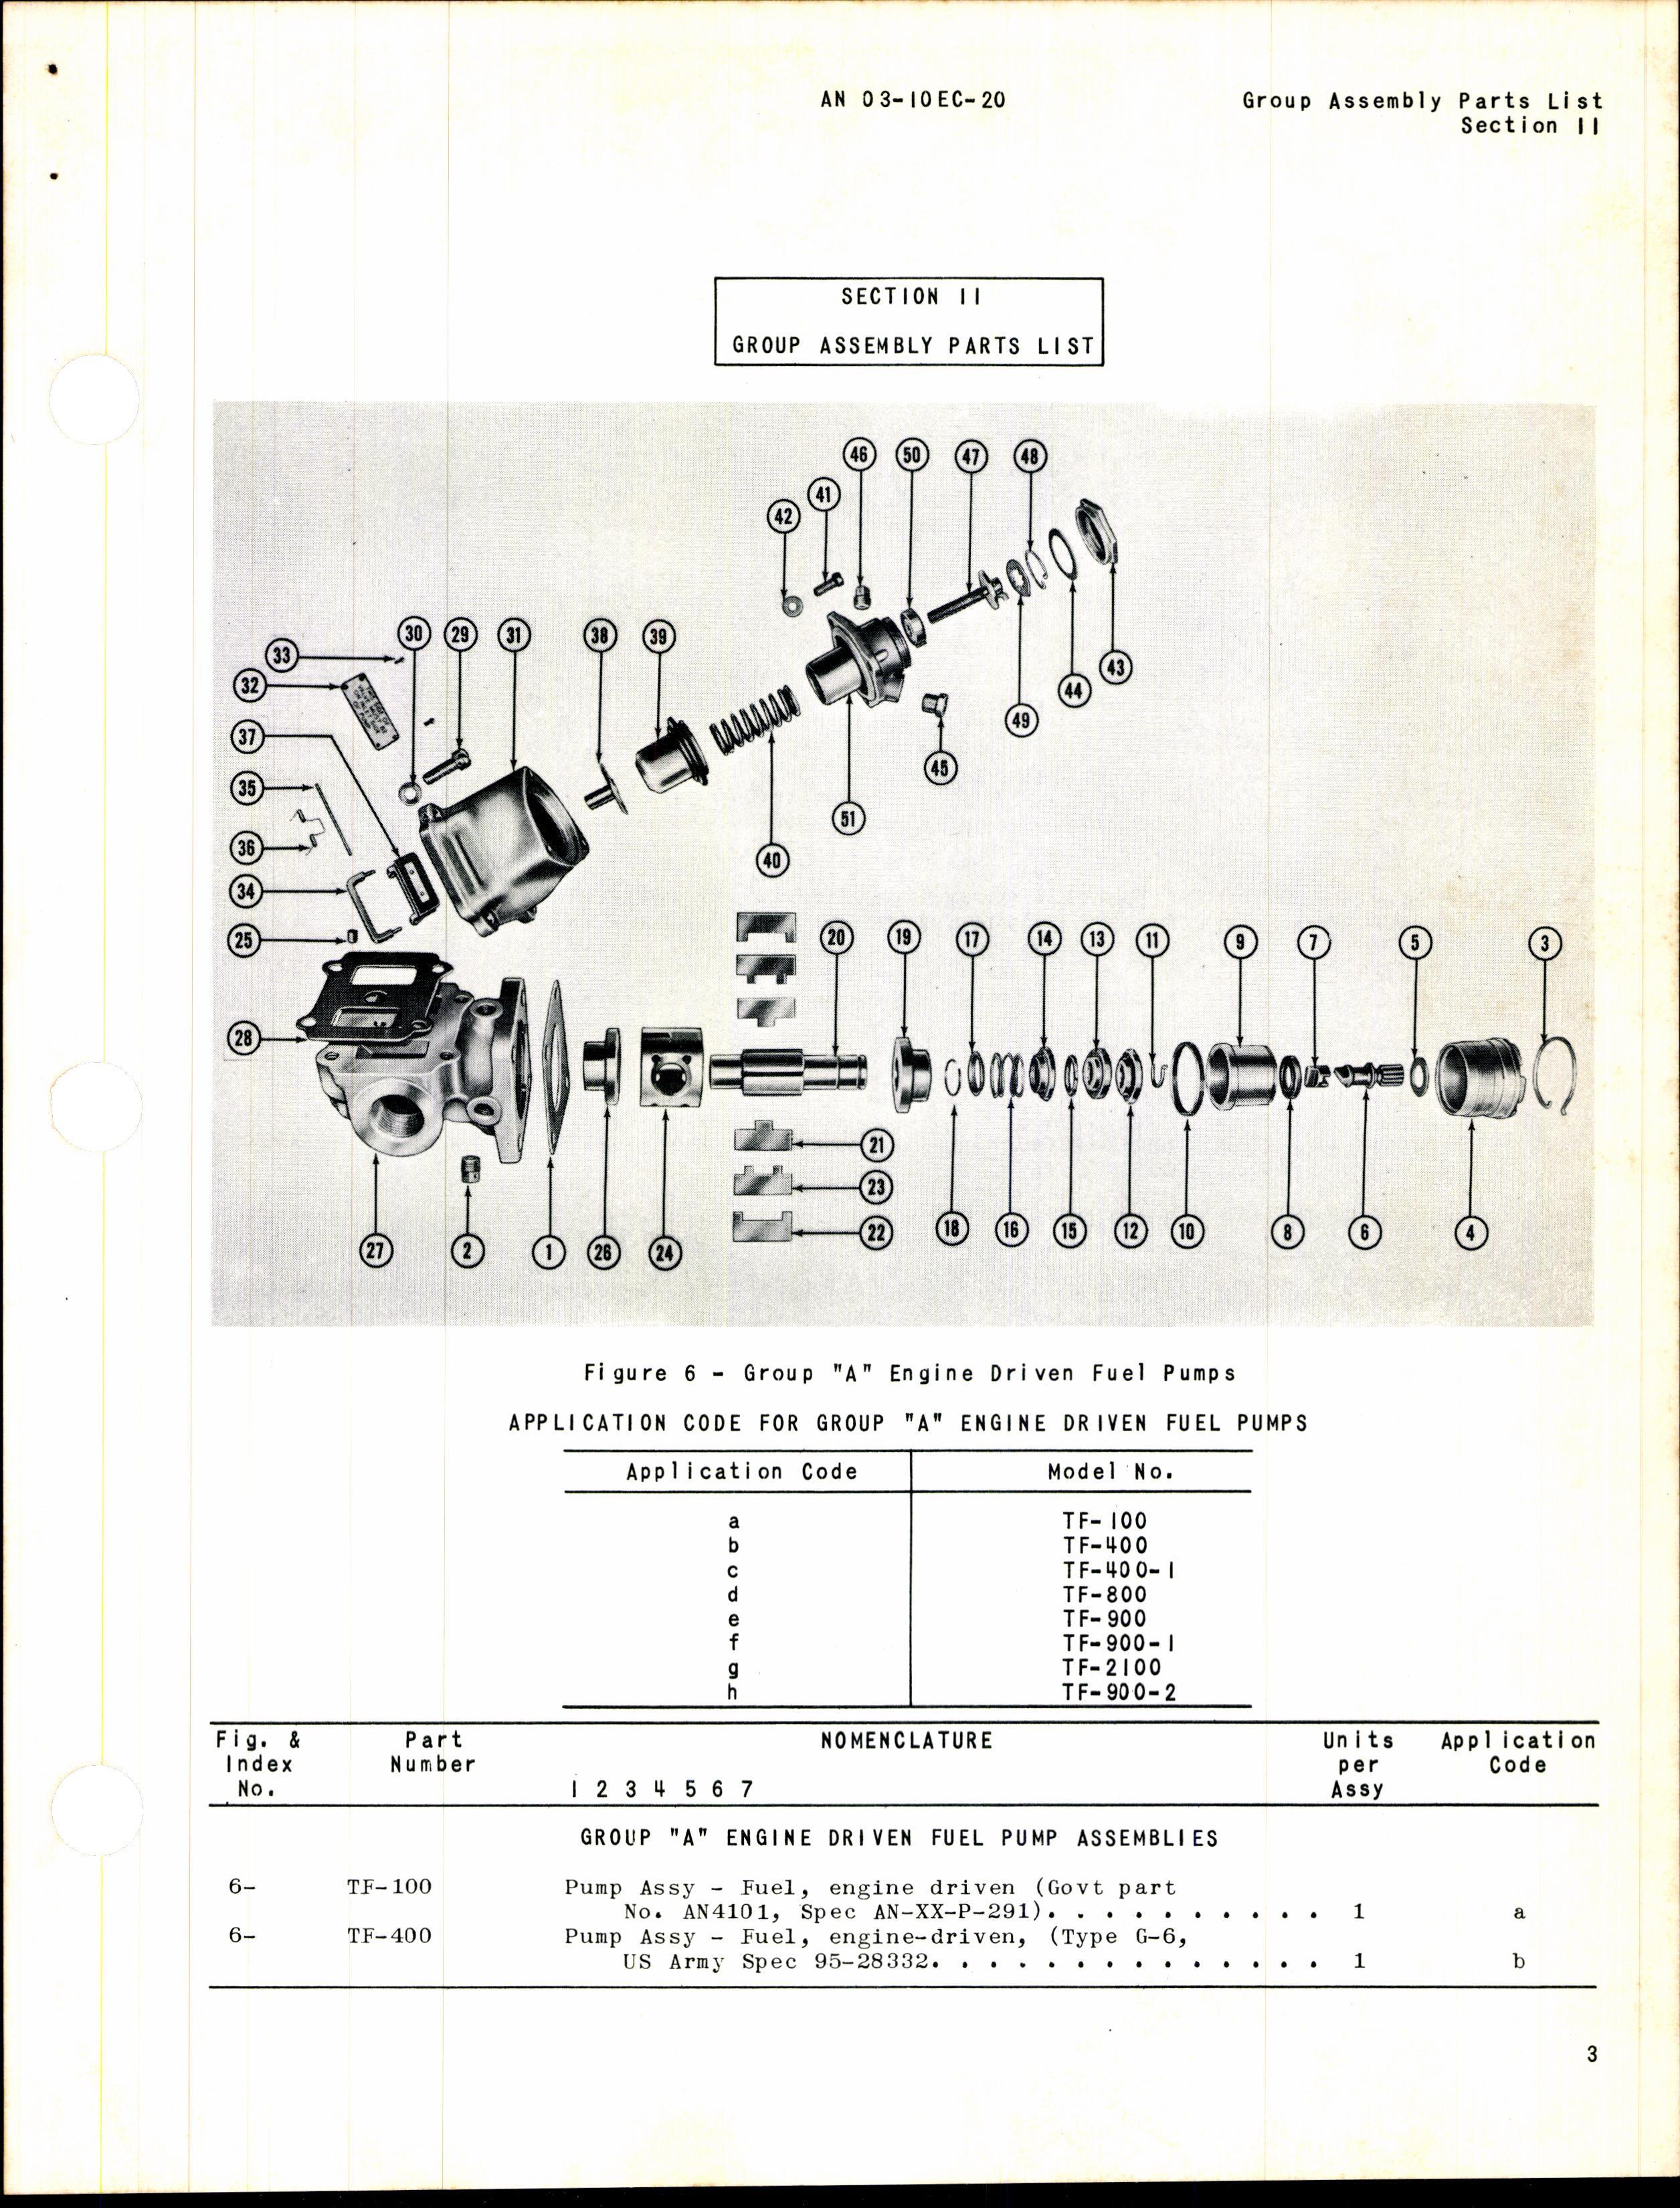 Sample page 5 from AirCorps Library document: Parts Catalog for Engine-Driven & Electric Motor Driven Thompson Fuel Pump